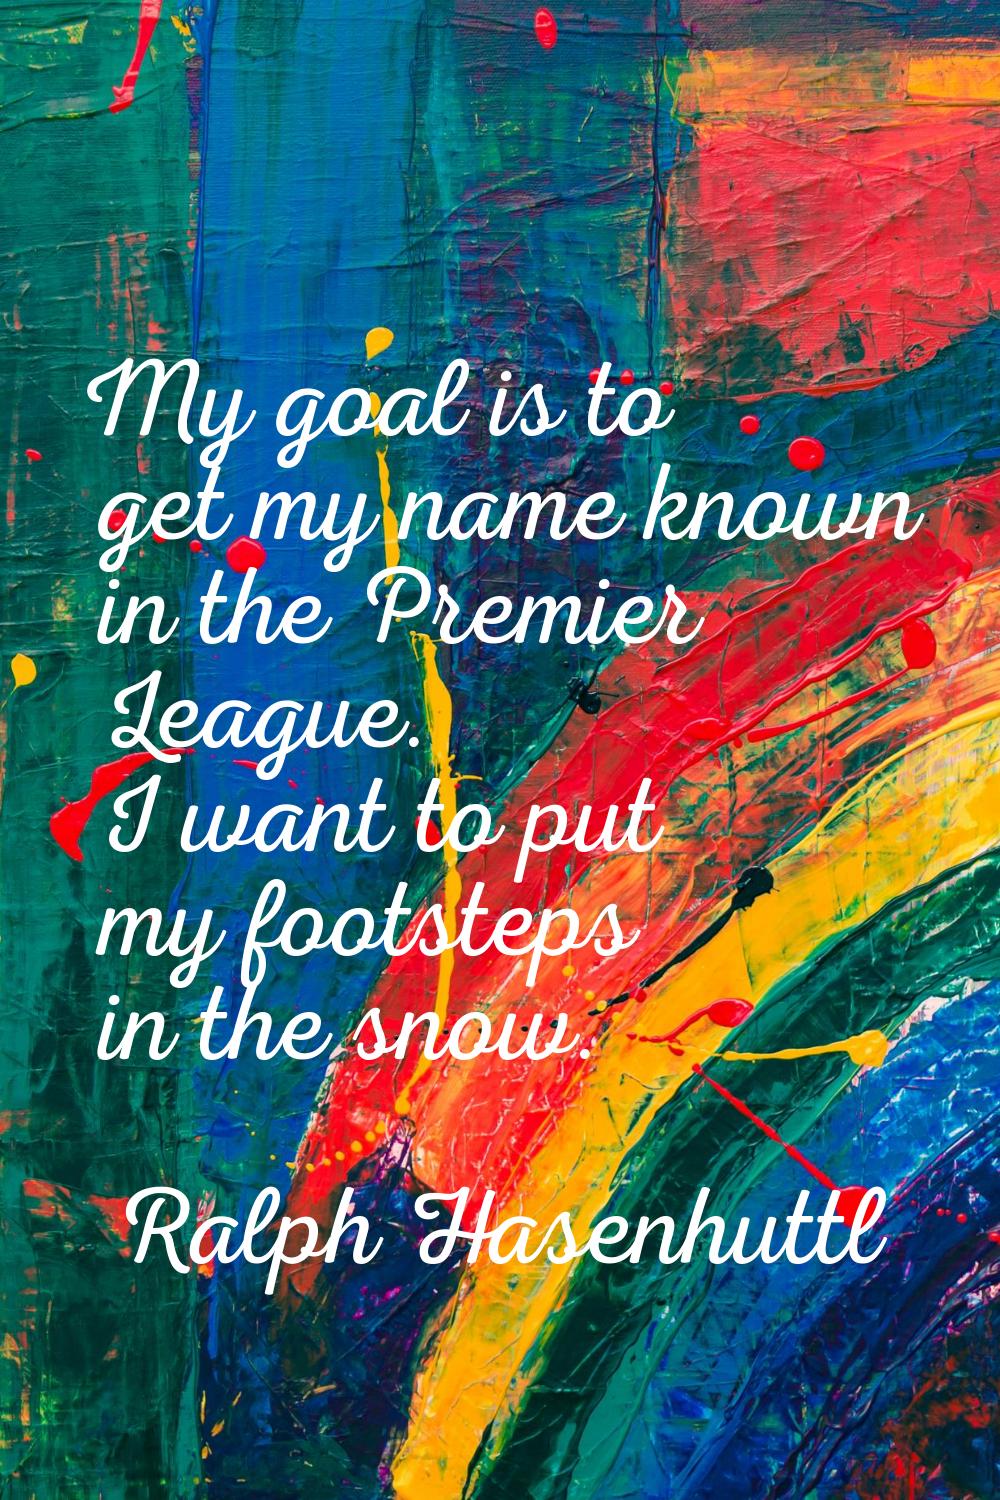 My goal is to get my name known in the Premier League. I want to put my footsteps in the snow.